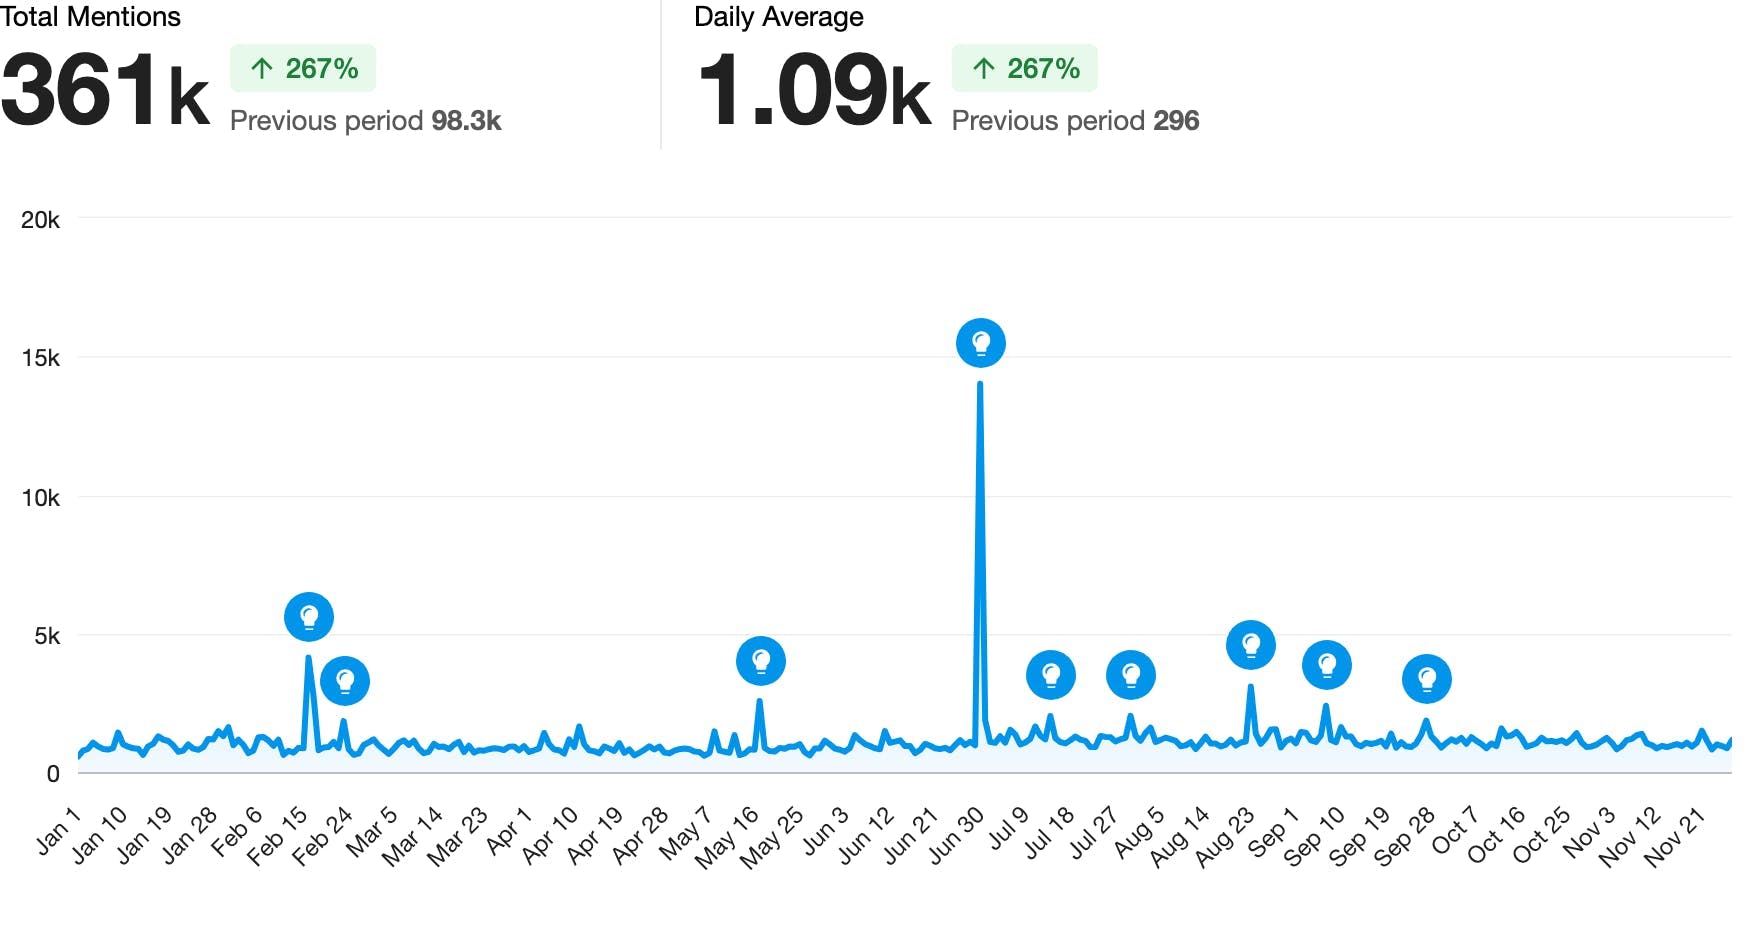 This chart shows mentions of "the ick" over time with a significant spike on June 30, with 361,000 total mentions at an average of 1,090 per day.